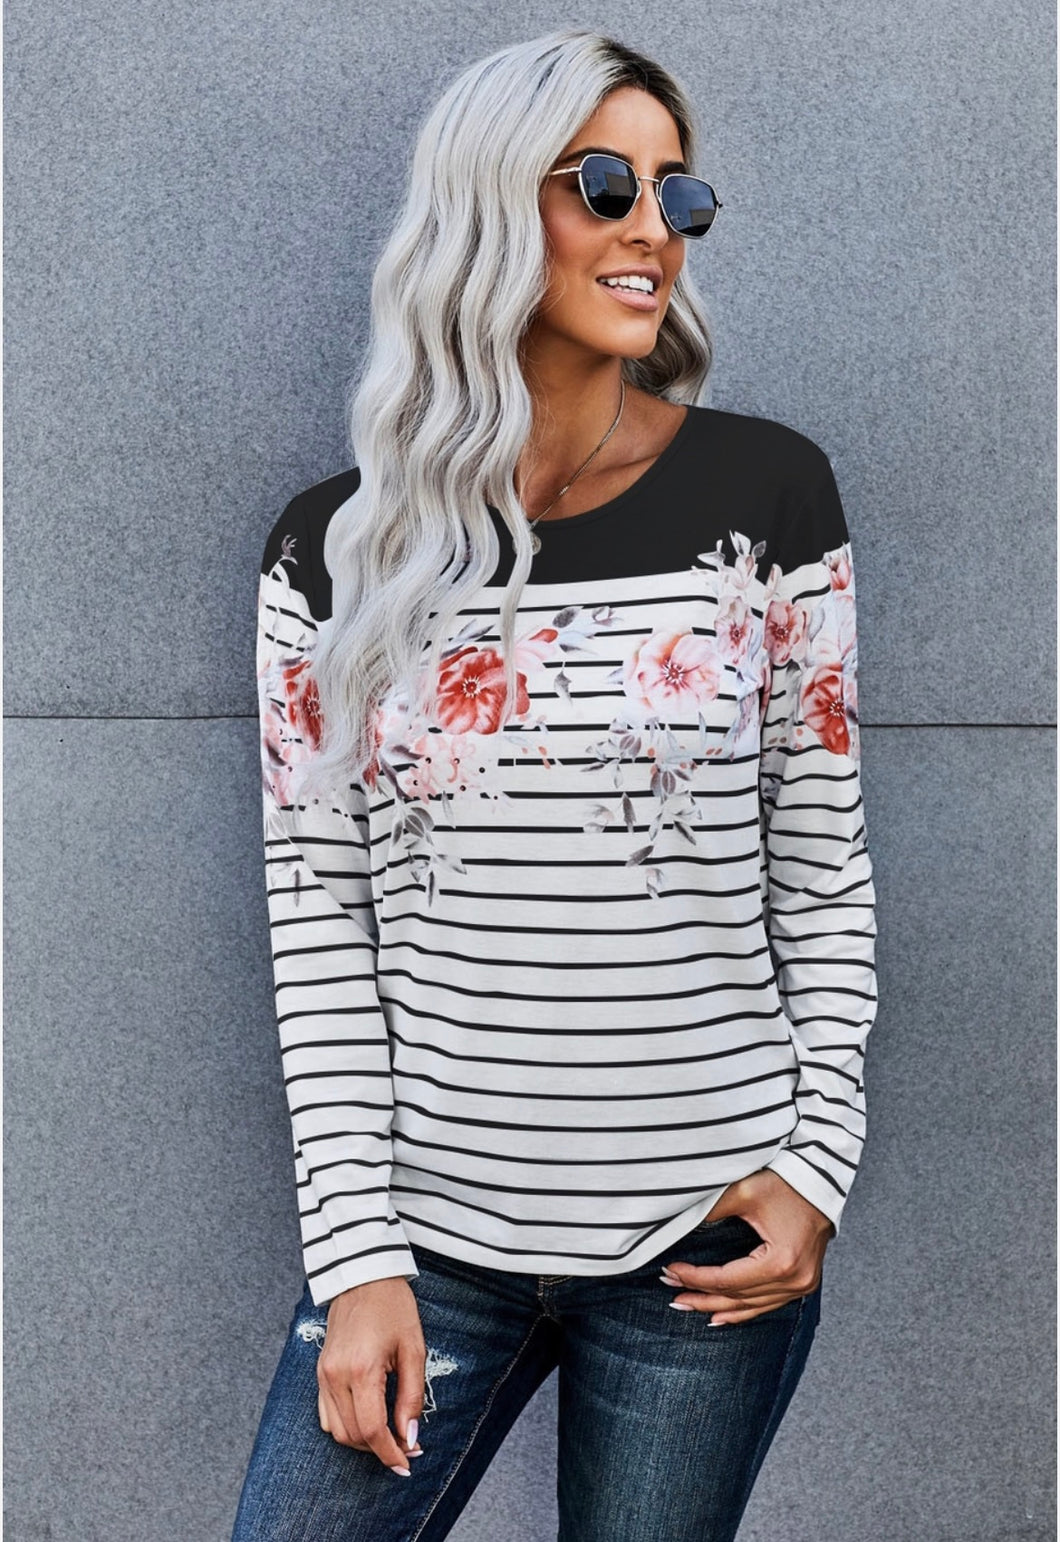 The Forget Me Not Floral Stripe Long-Sleeve Top